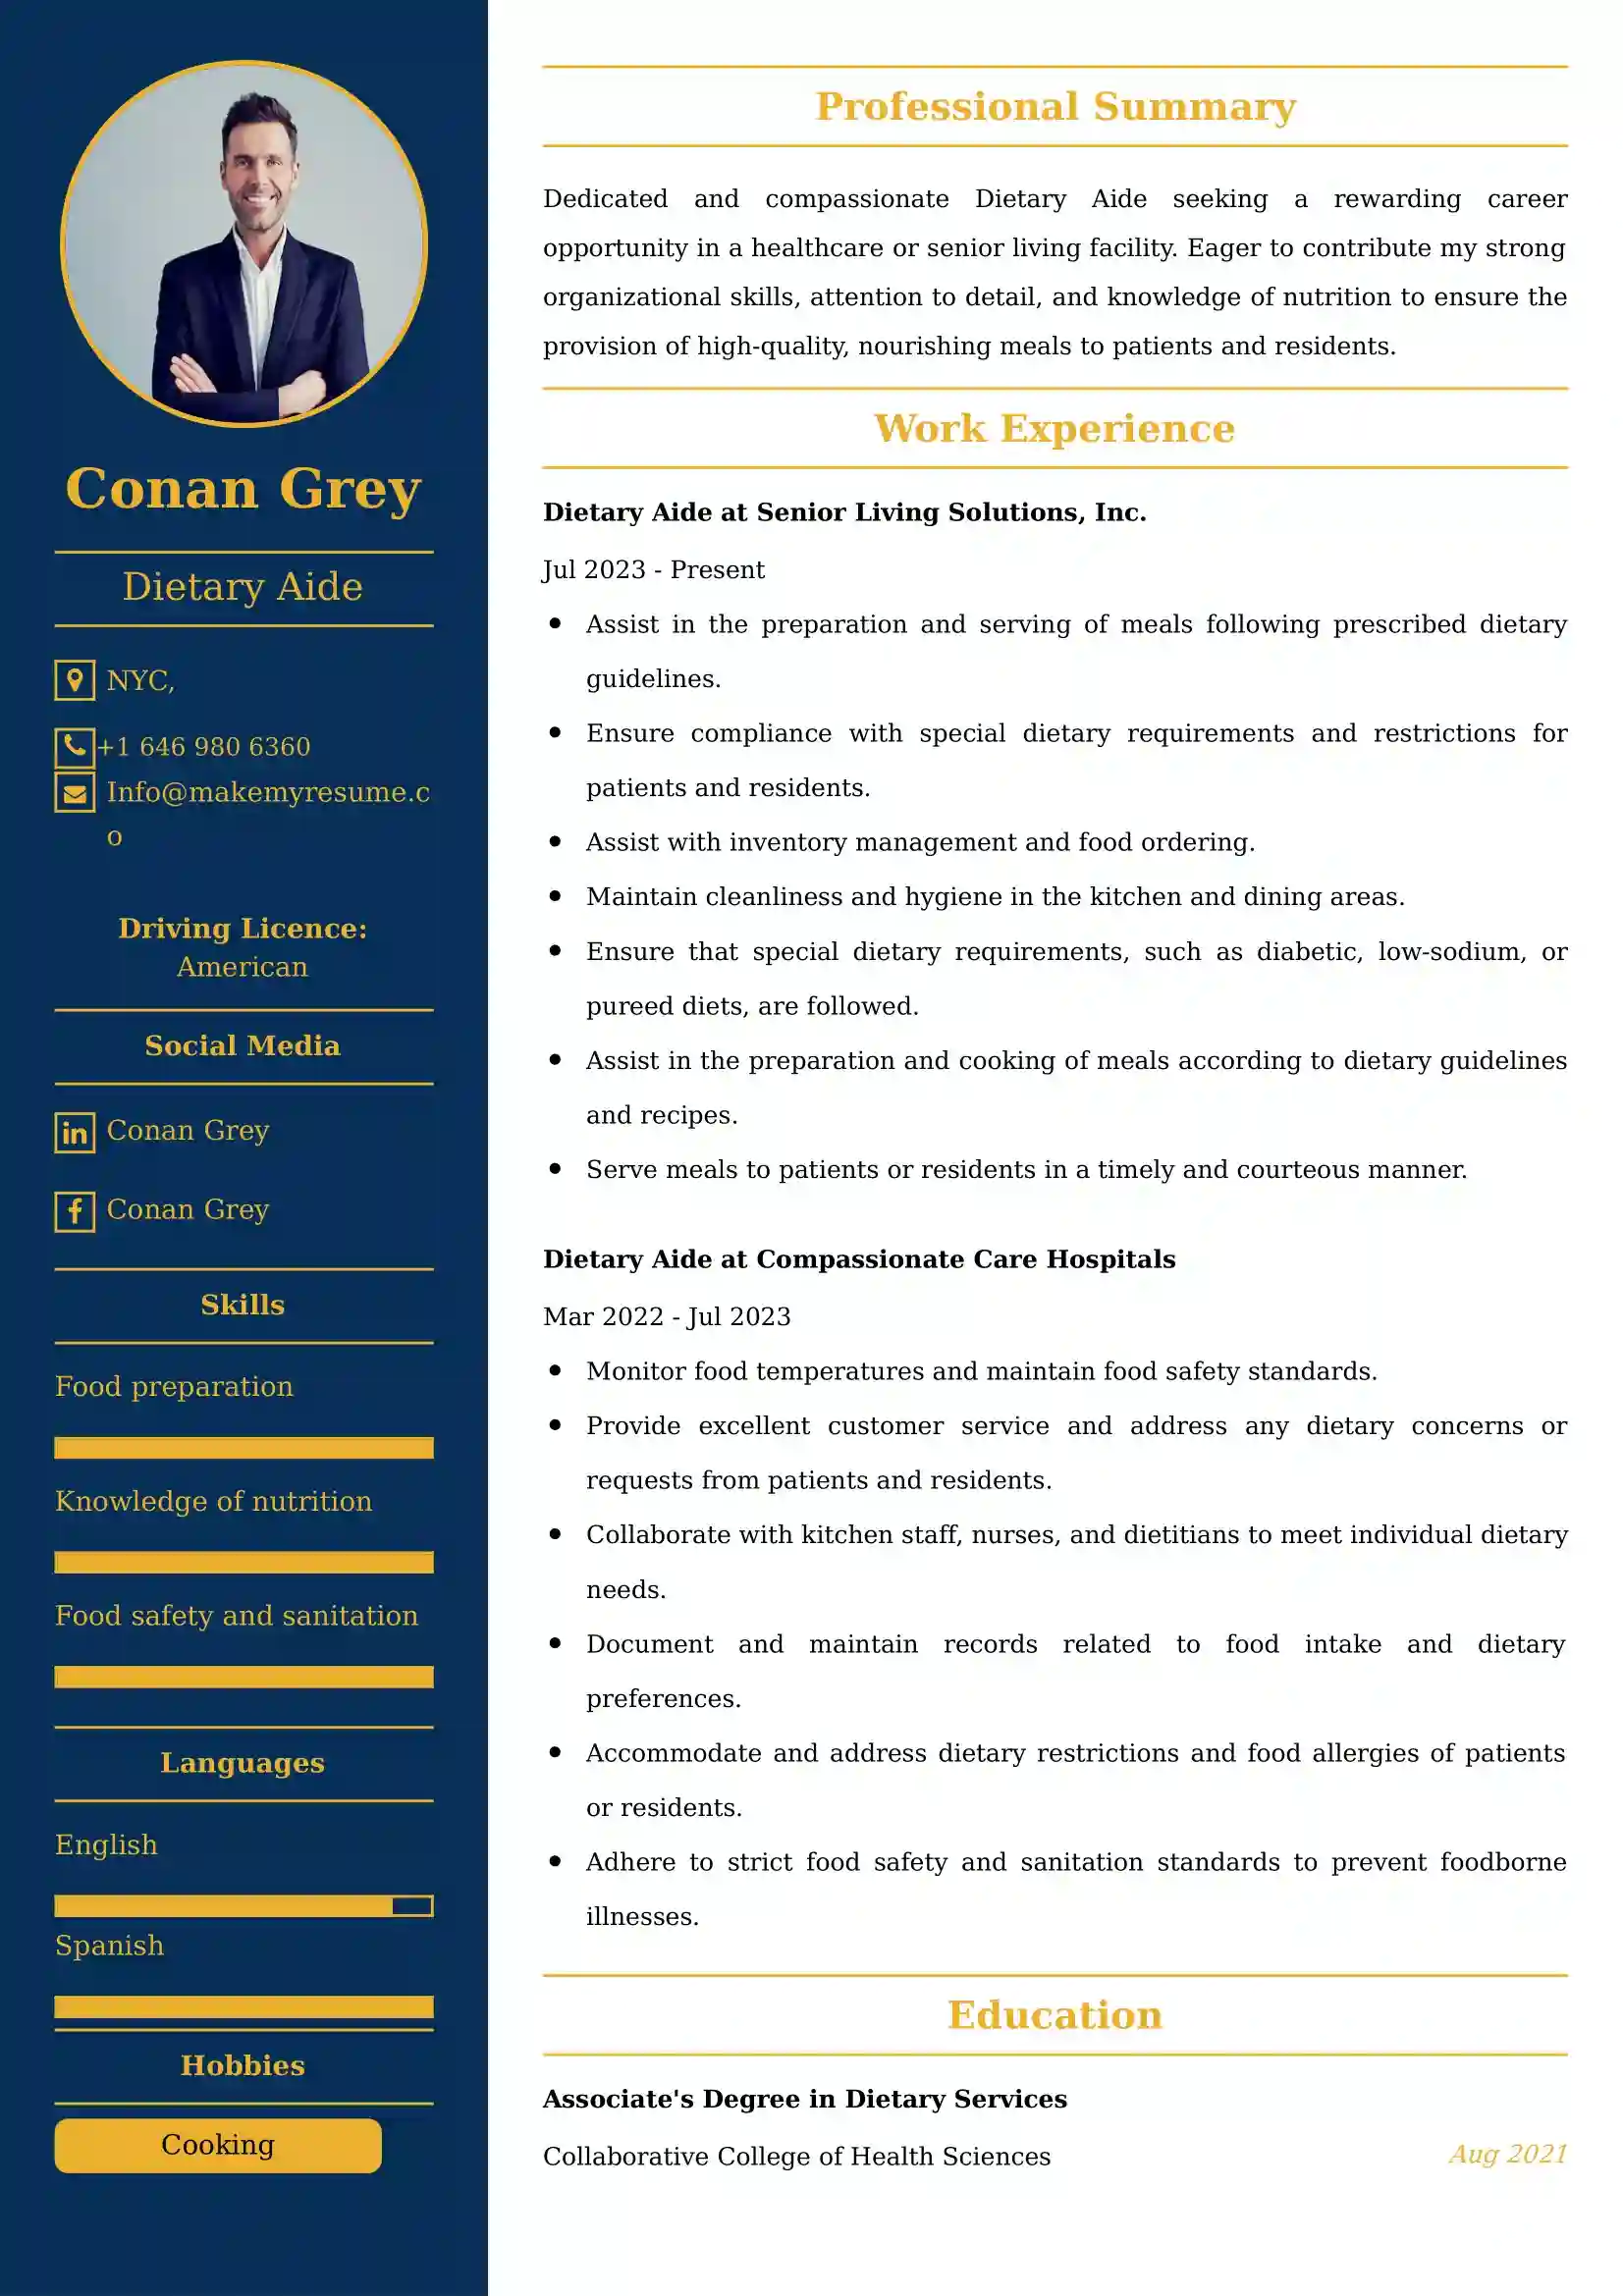 Dietary Aide Resume Examples - Brazilian Format, Latest Template